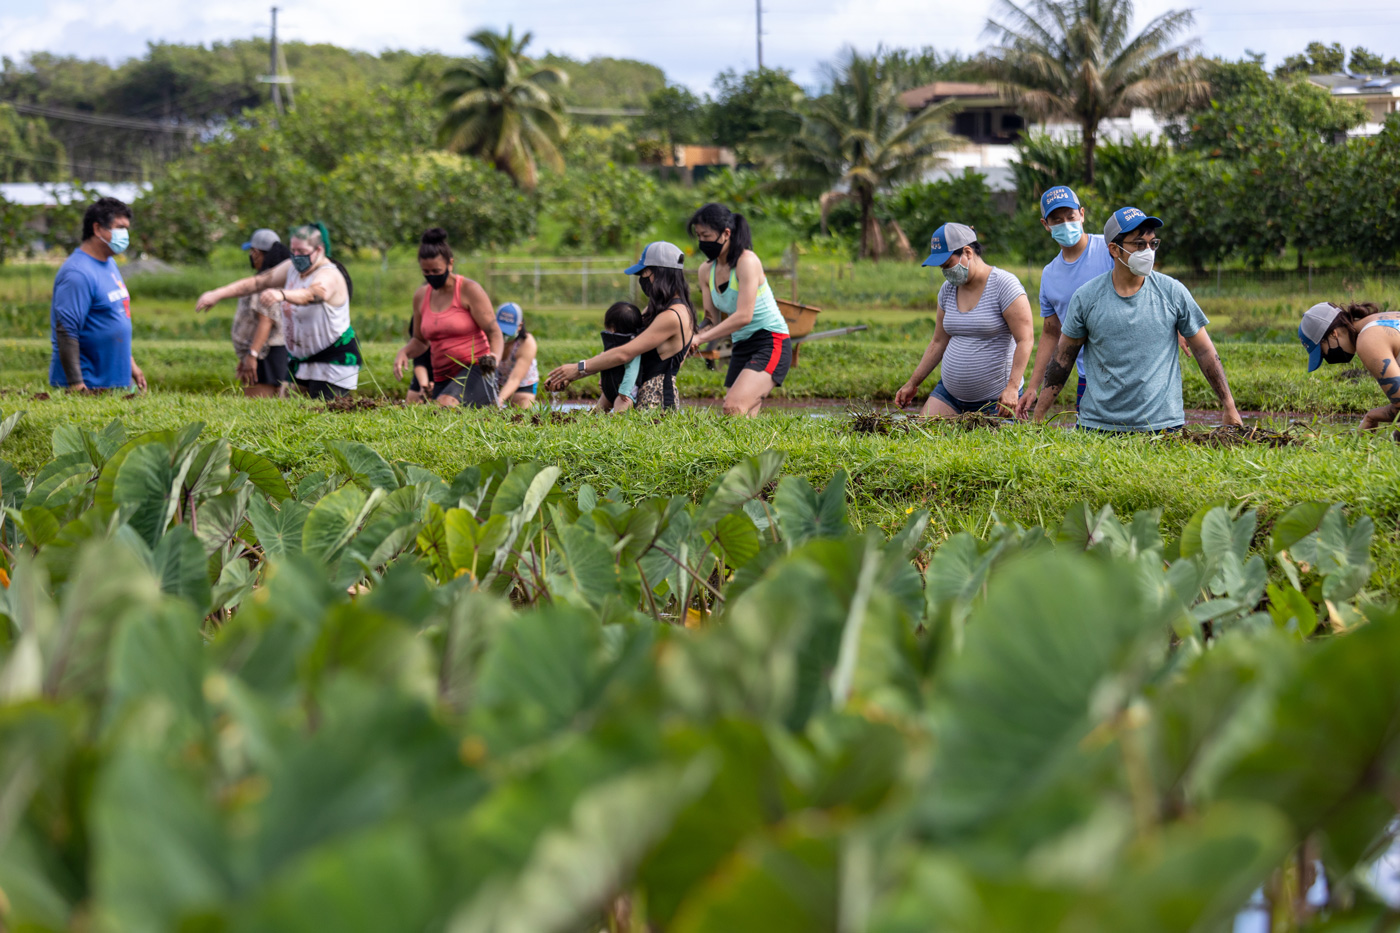 Learning about kalo (or taro) as we helped to aerate the loʻi.